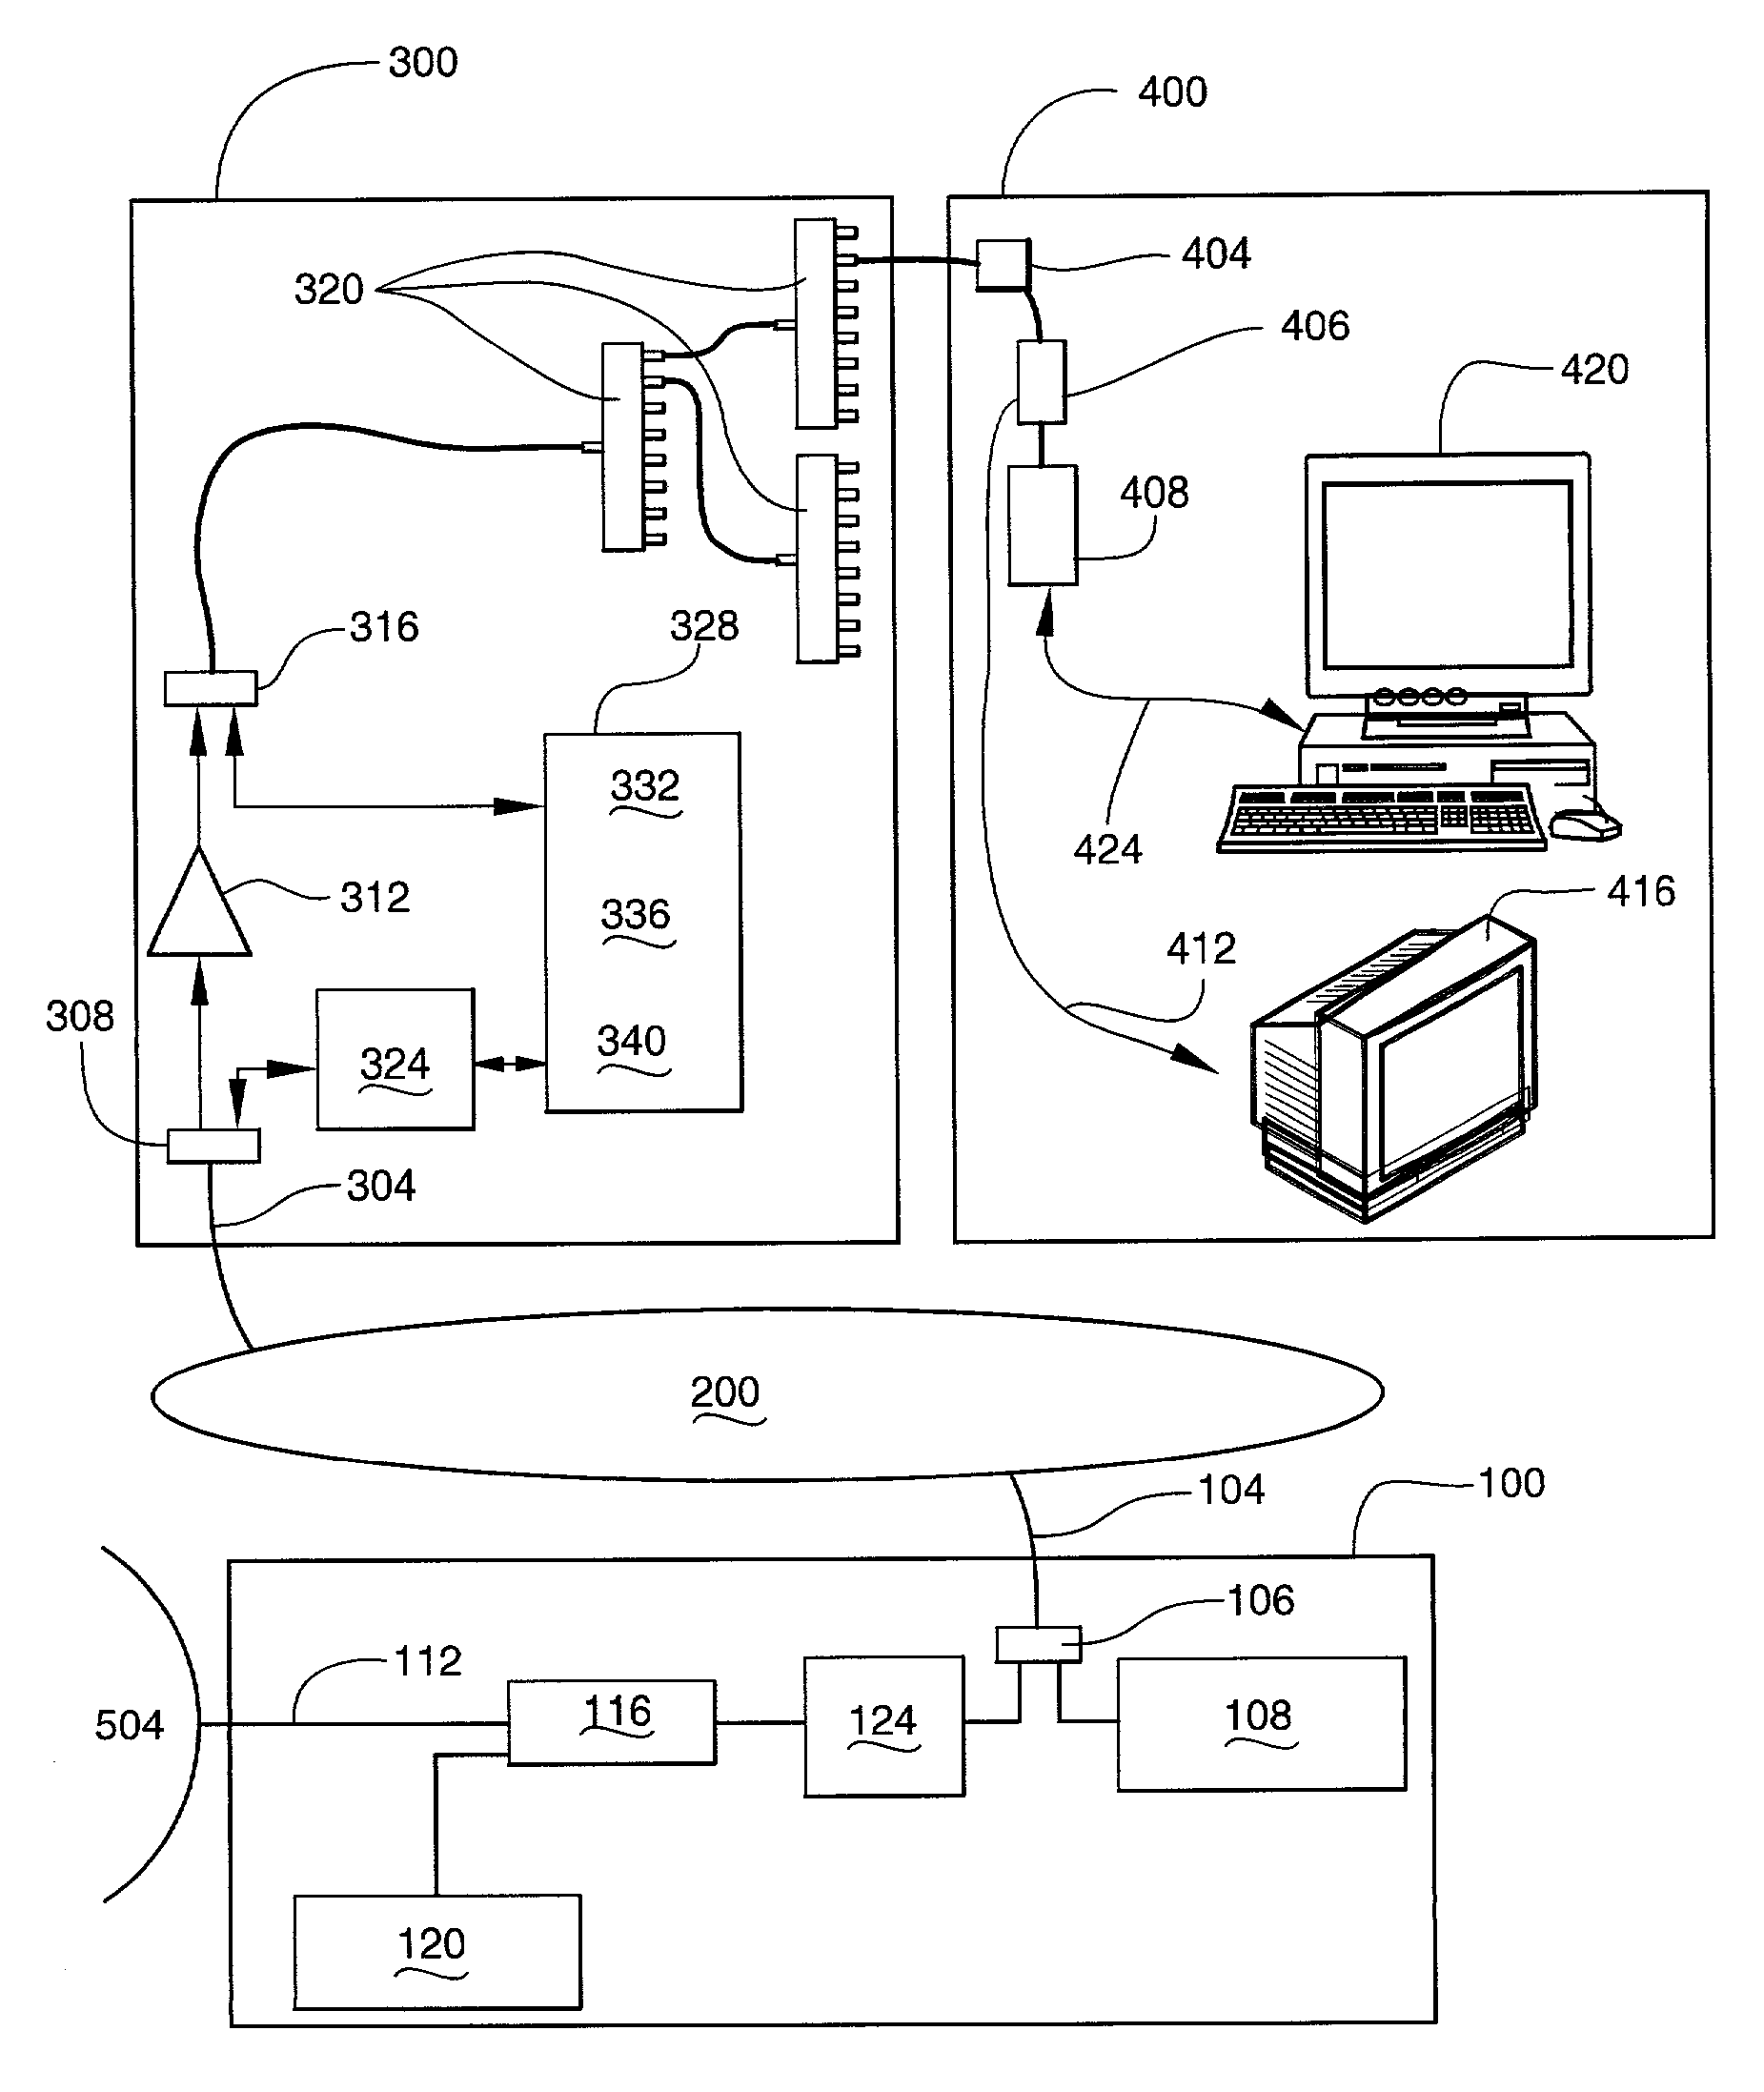 Capacity scaling and functional element redistribution within an in-building coax cable internet access system